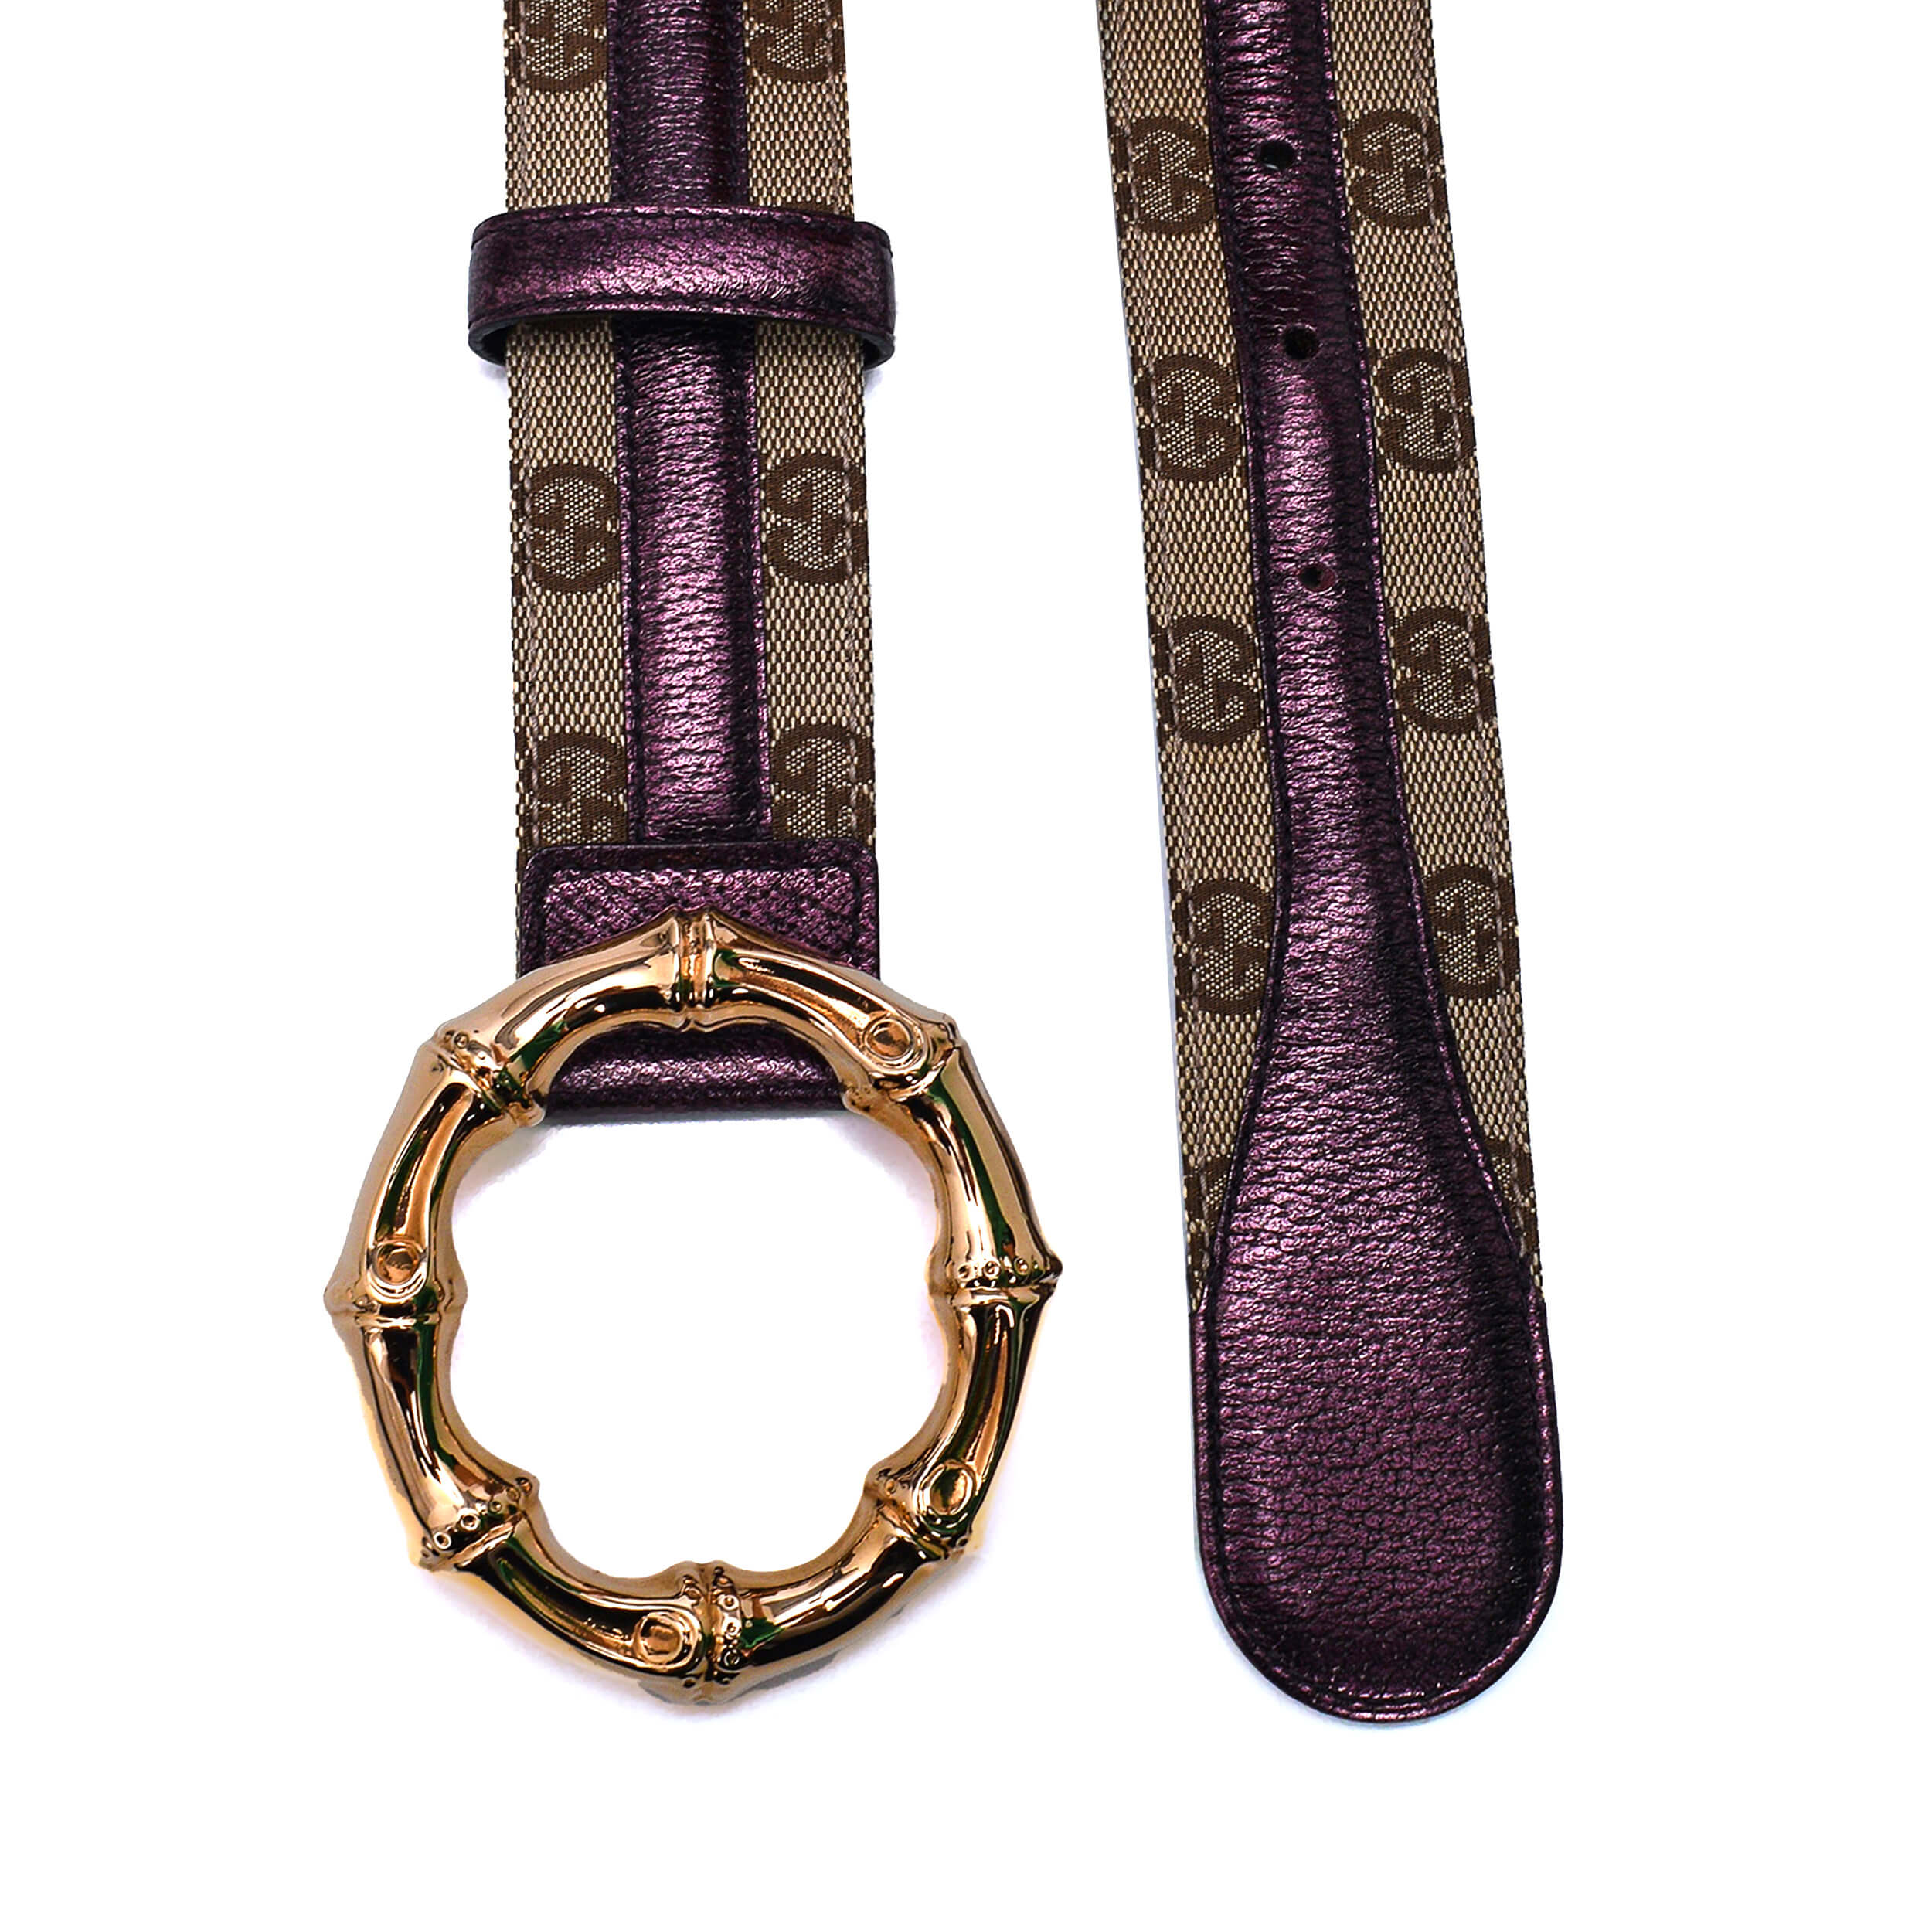 Gucci - Gucci GG Supreme&Bronze Leather Gold Bamboo Buckle Belt